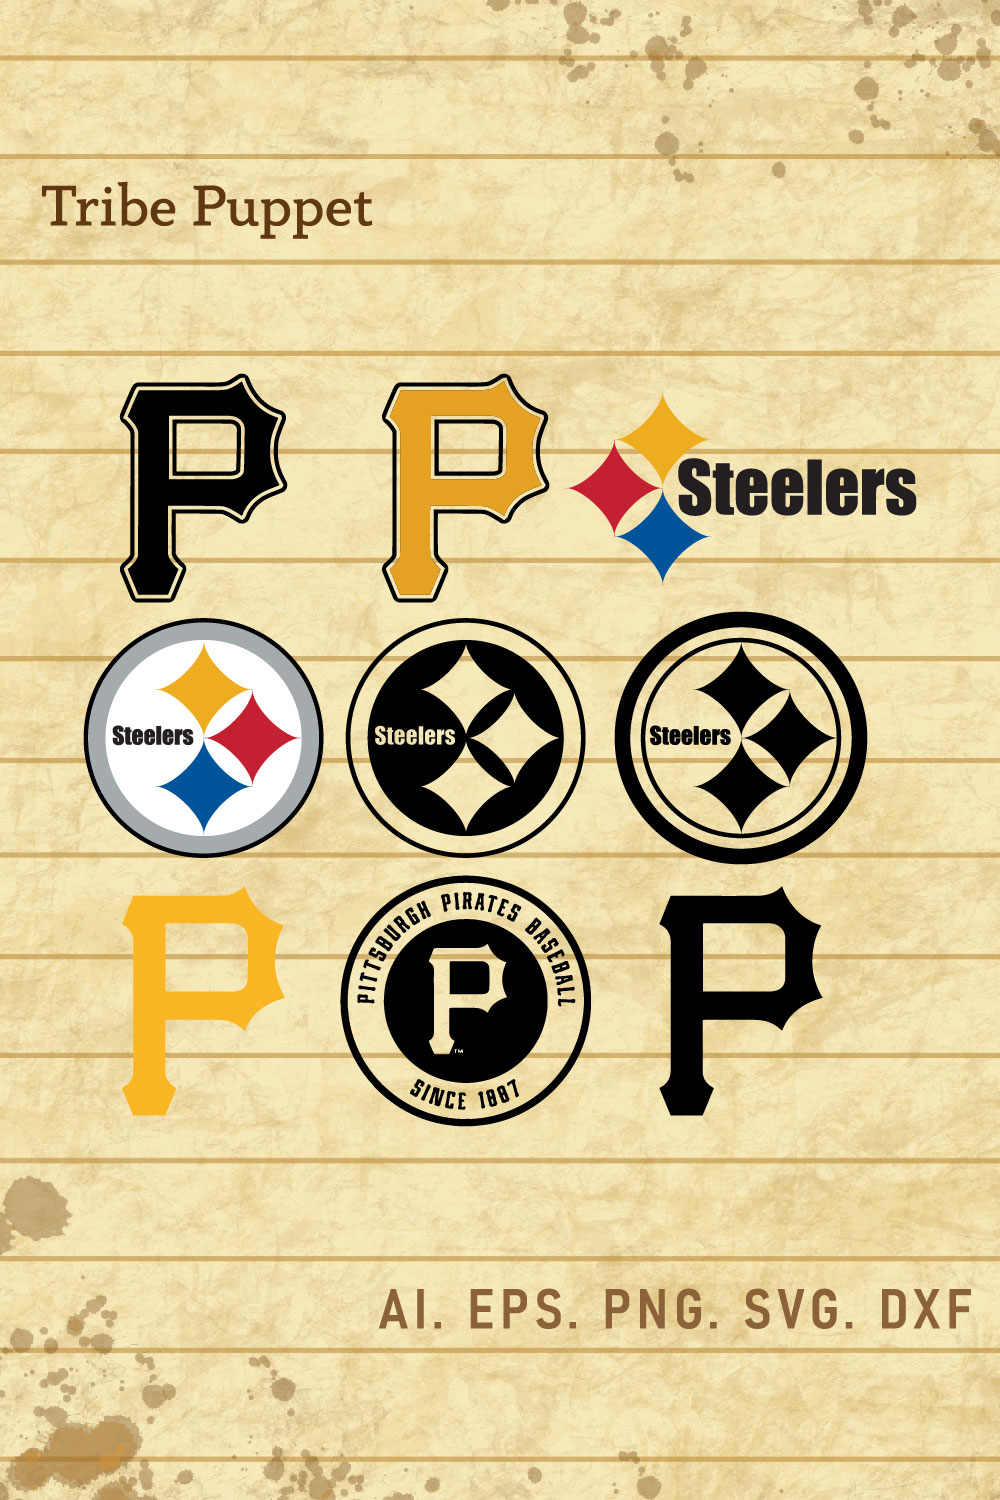 543 Pittsburgh Pirates Images, Stock Photos, 3D objects, & Vectors